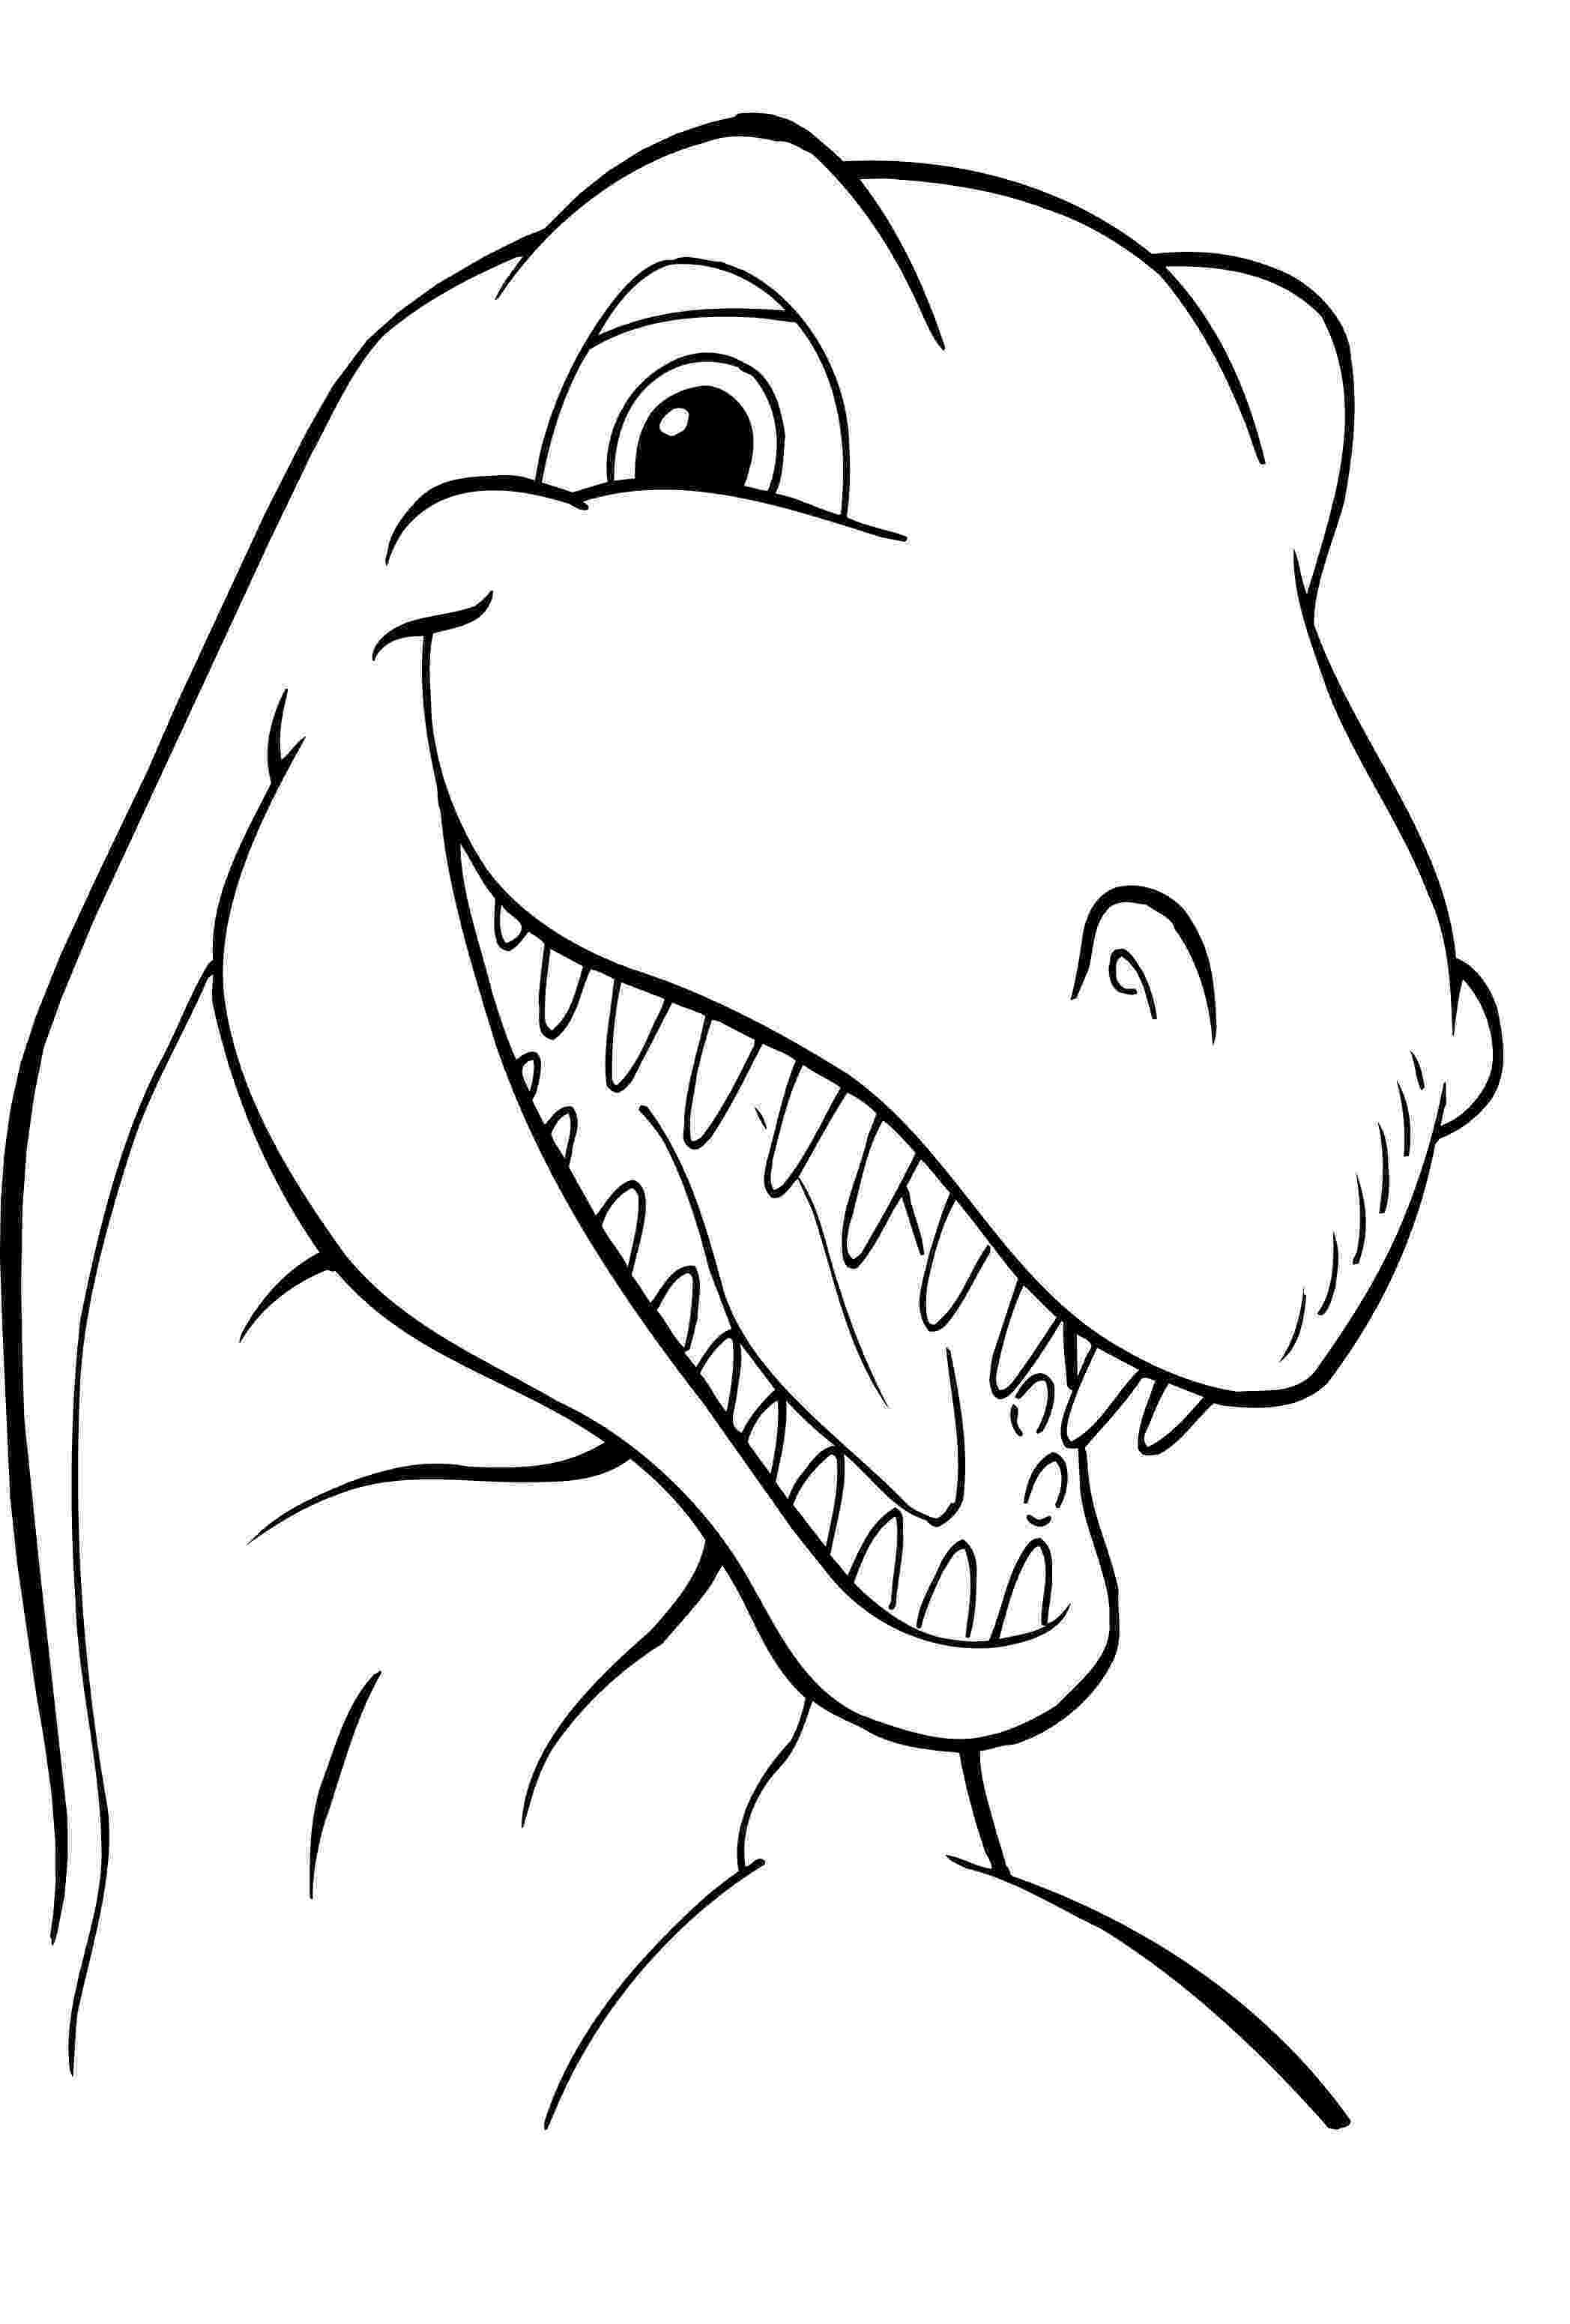 dinosaur coloring pages for toddlers dinosaur coloring pages to download and print for free pages coloring dinosaur toddlers for 